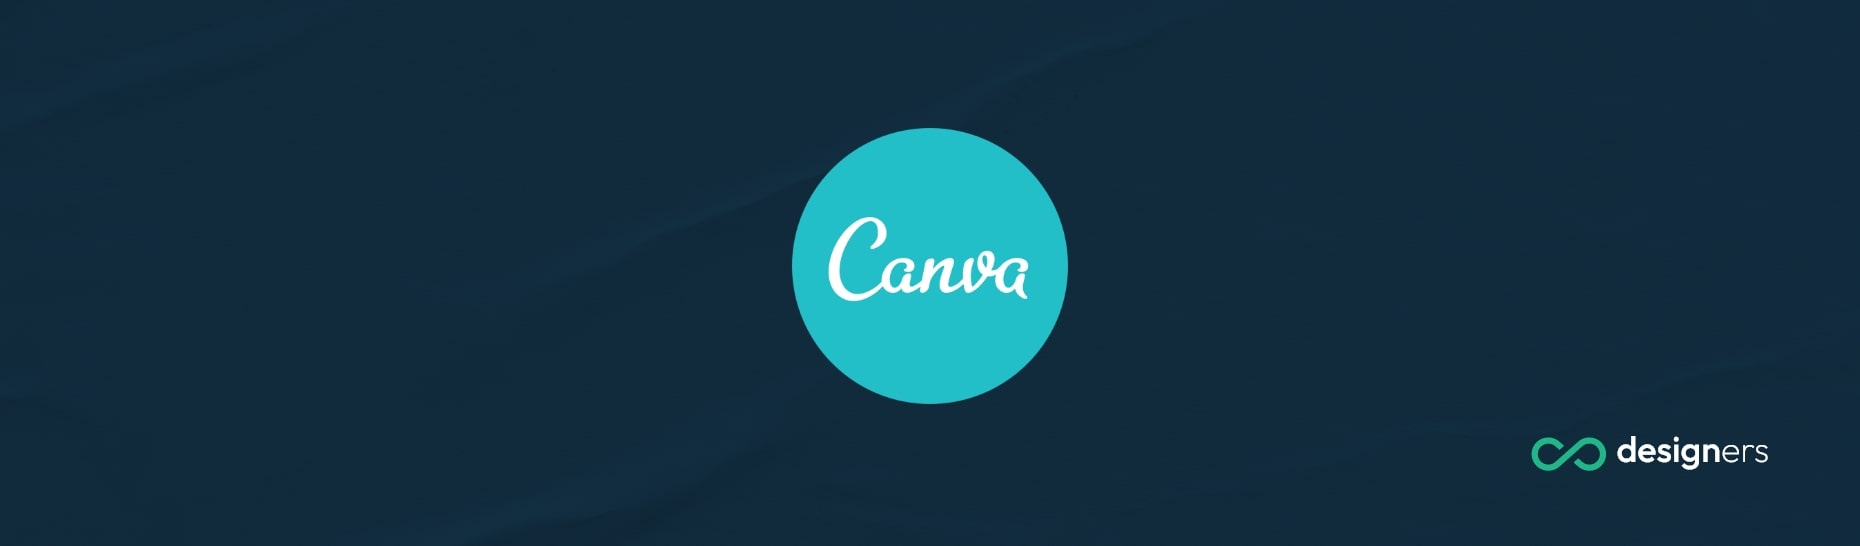 Does Canva Integrate With ActiveCampaign?